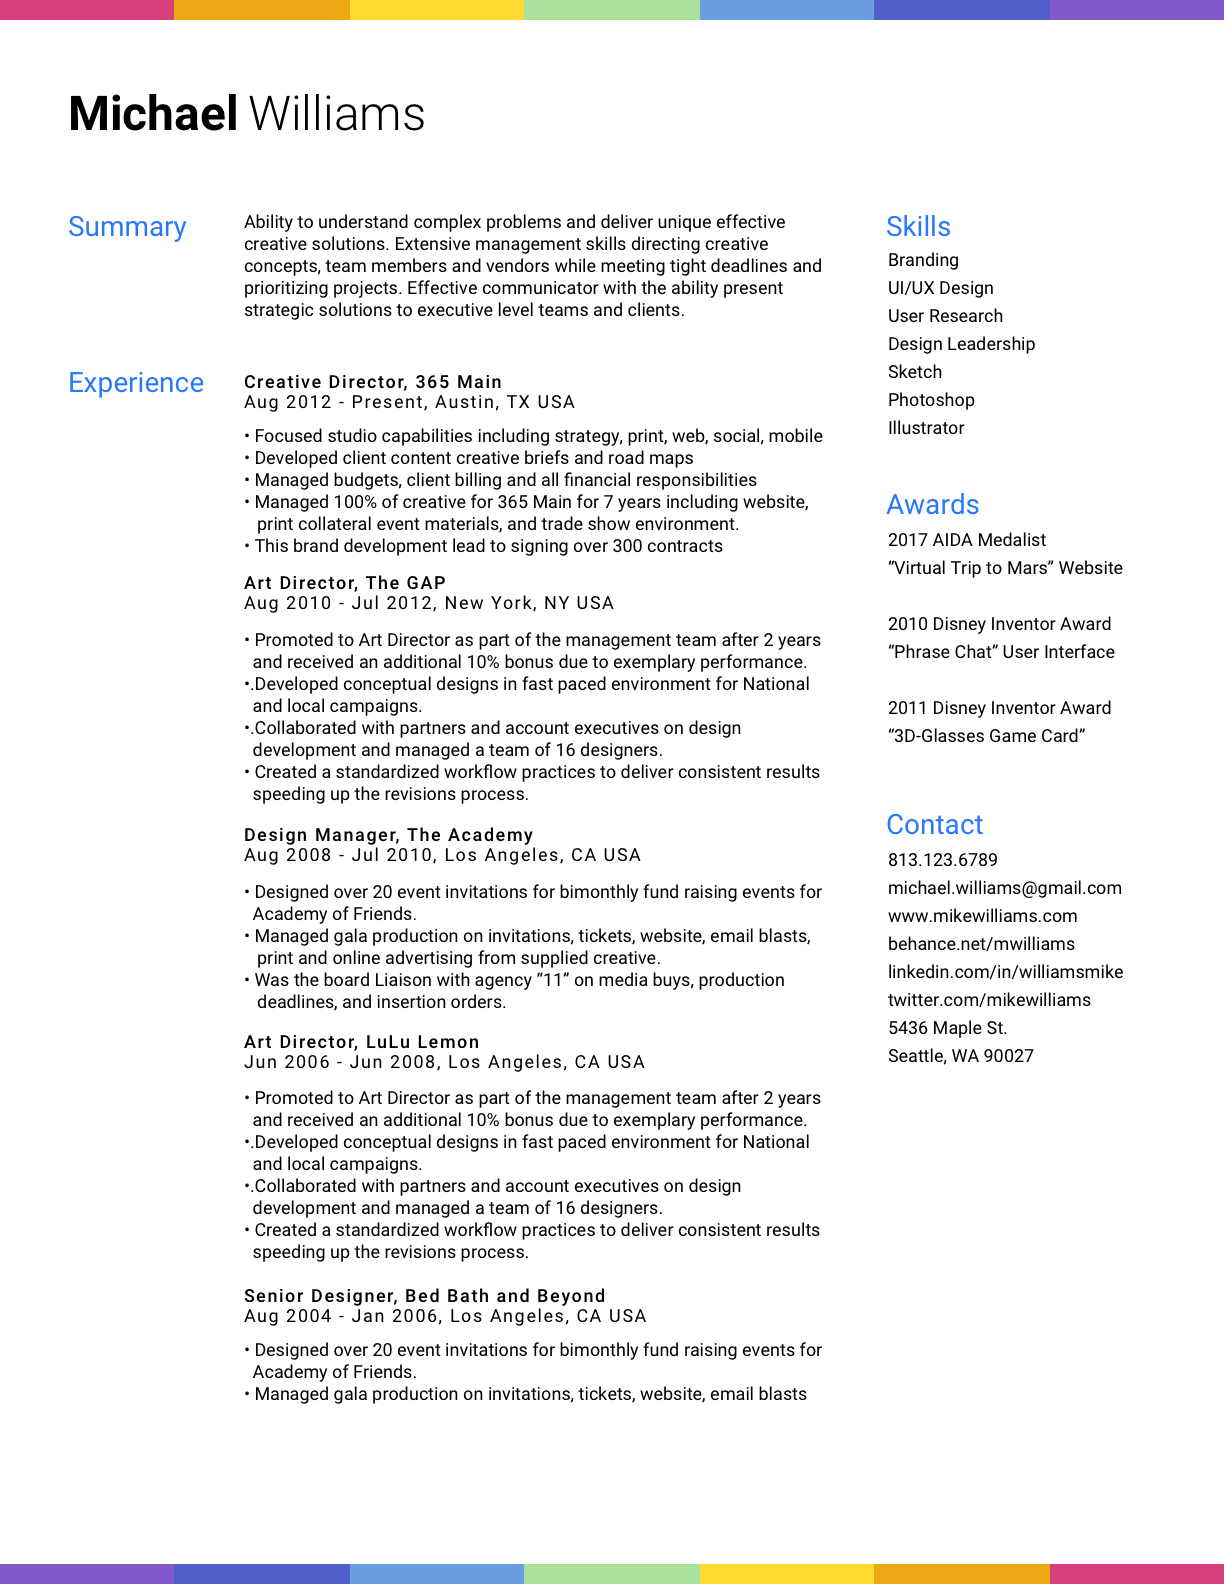 Culinary Resume Example